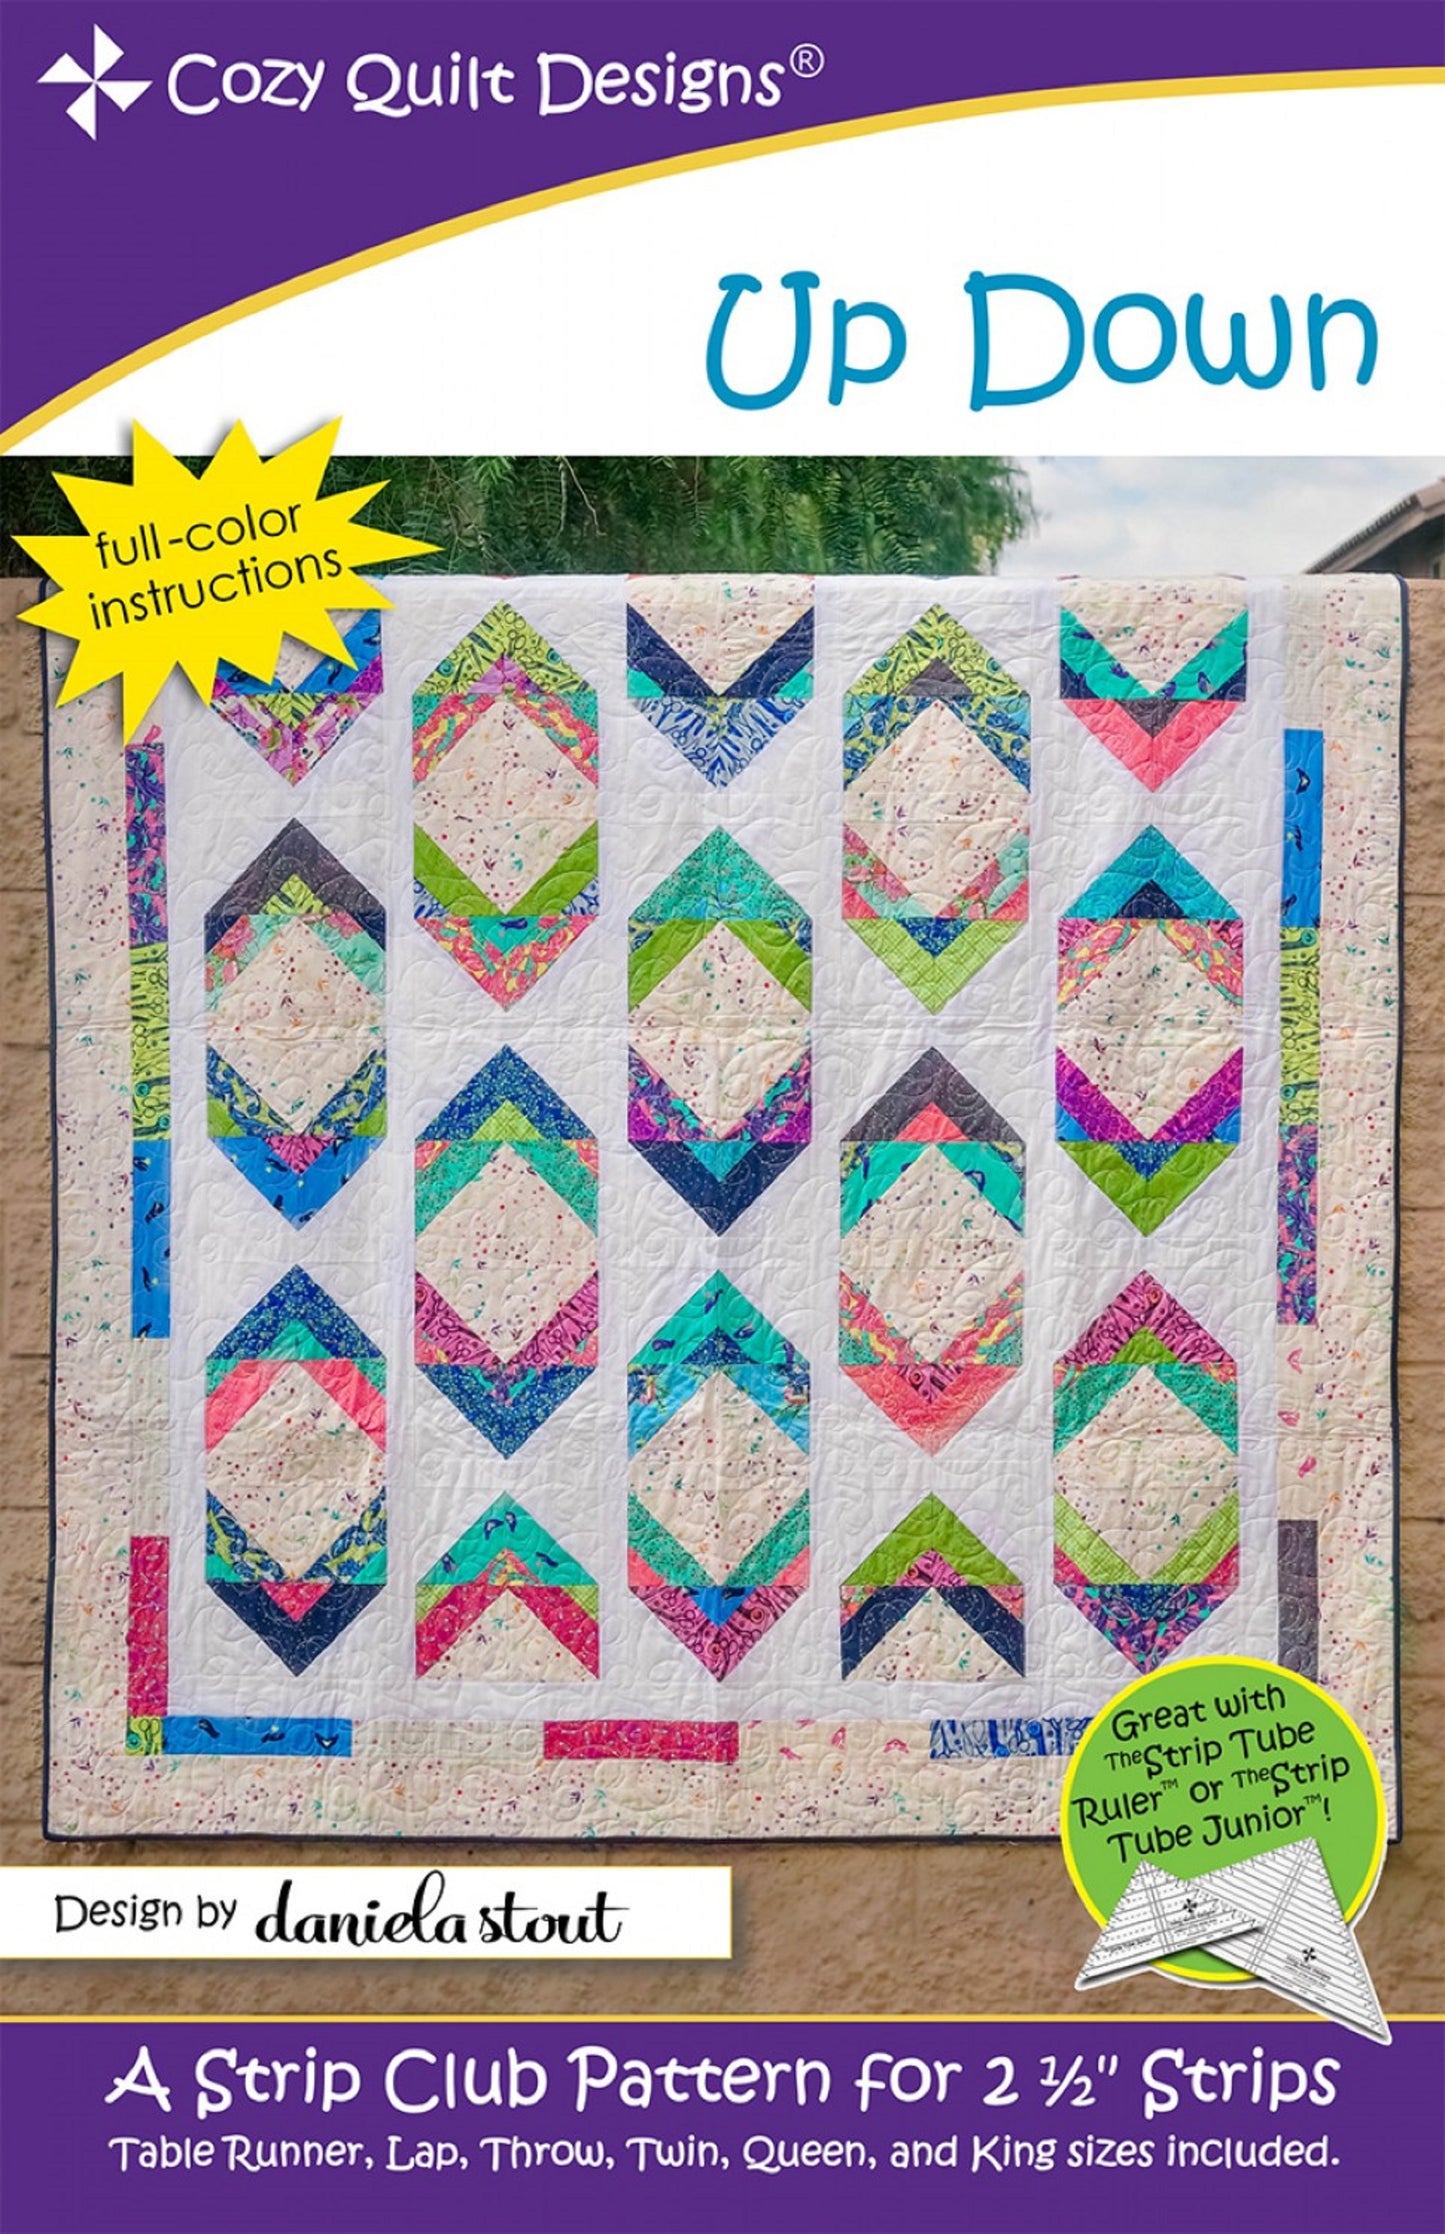 Up Down Quilt Pattern by Cozy Quilt Designs